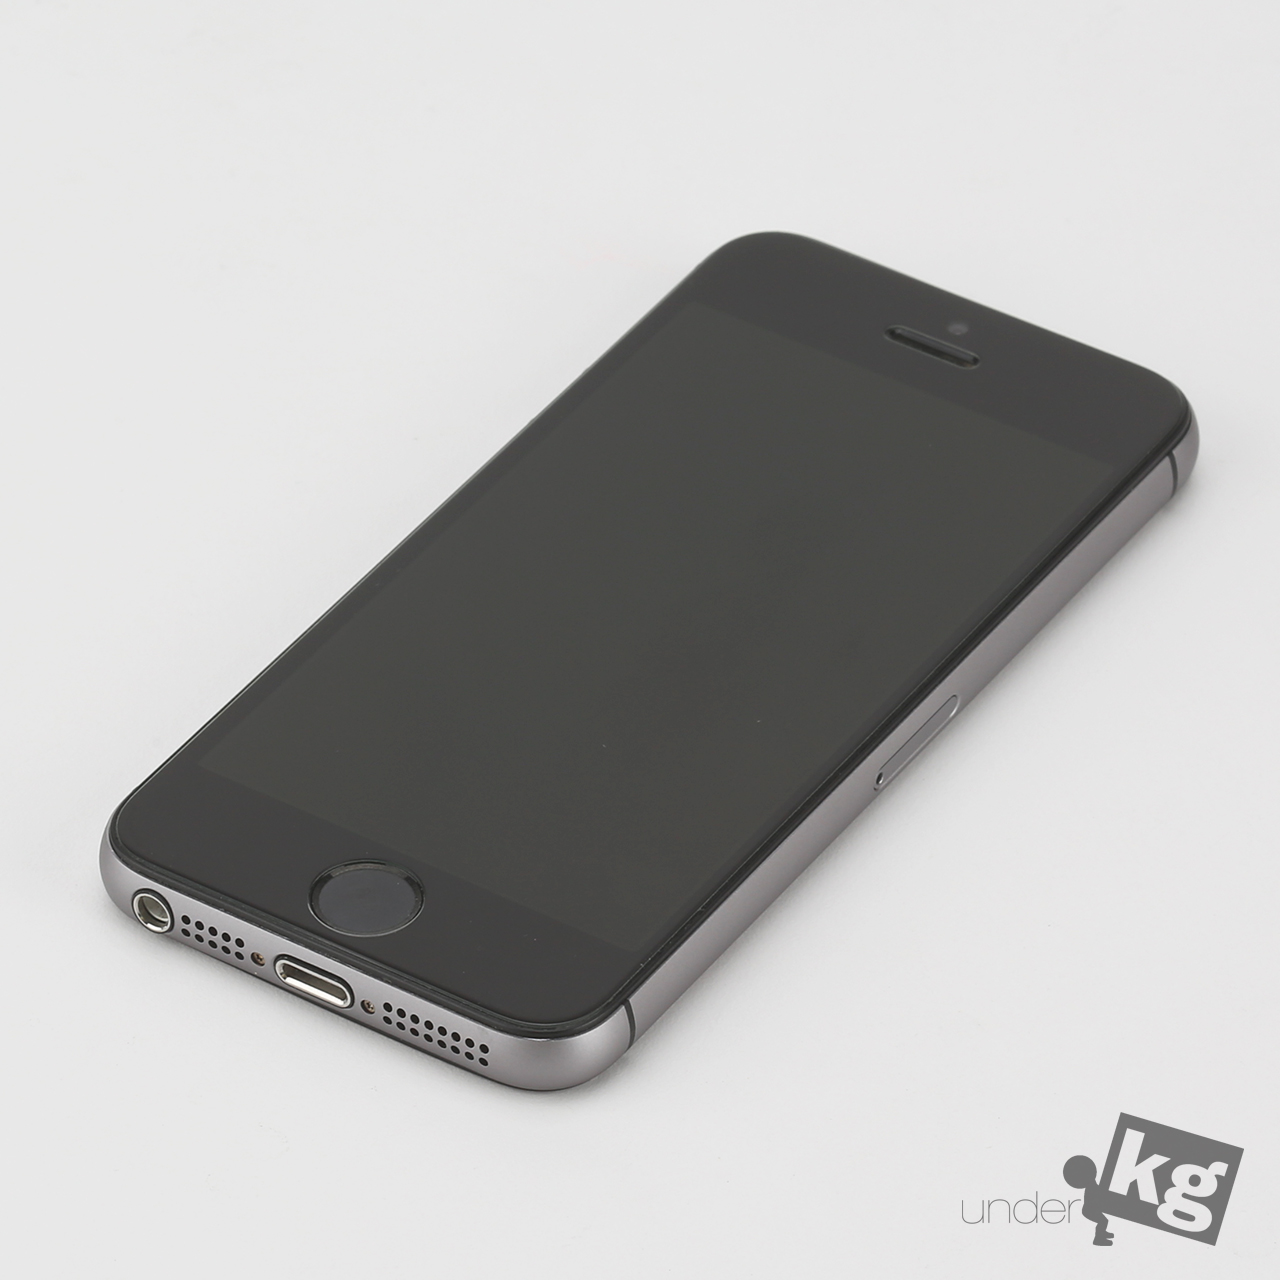 iphone5s-to-iphone6-housing-change-pic3.jpg